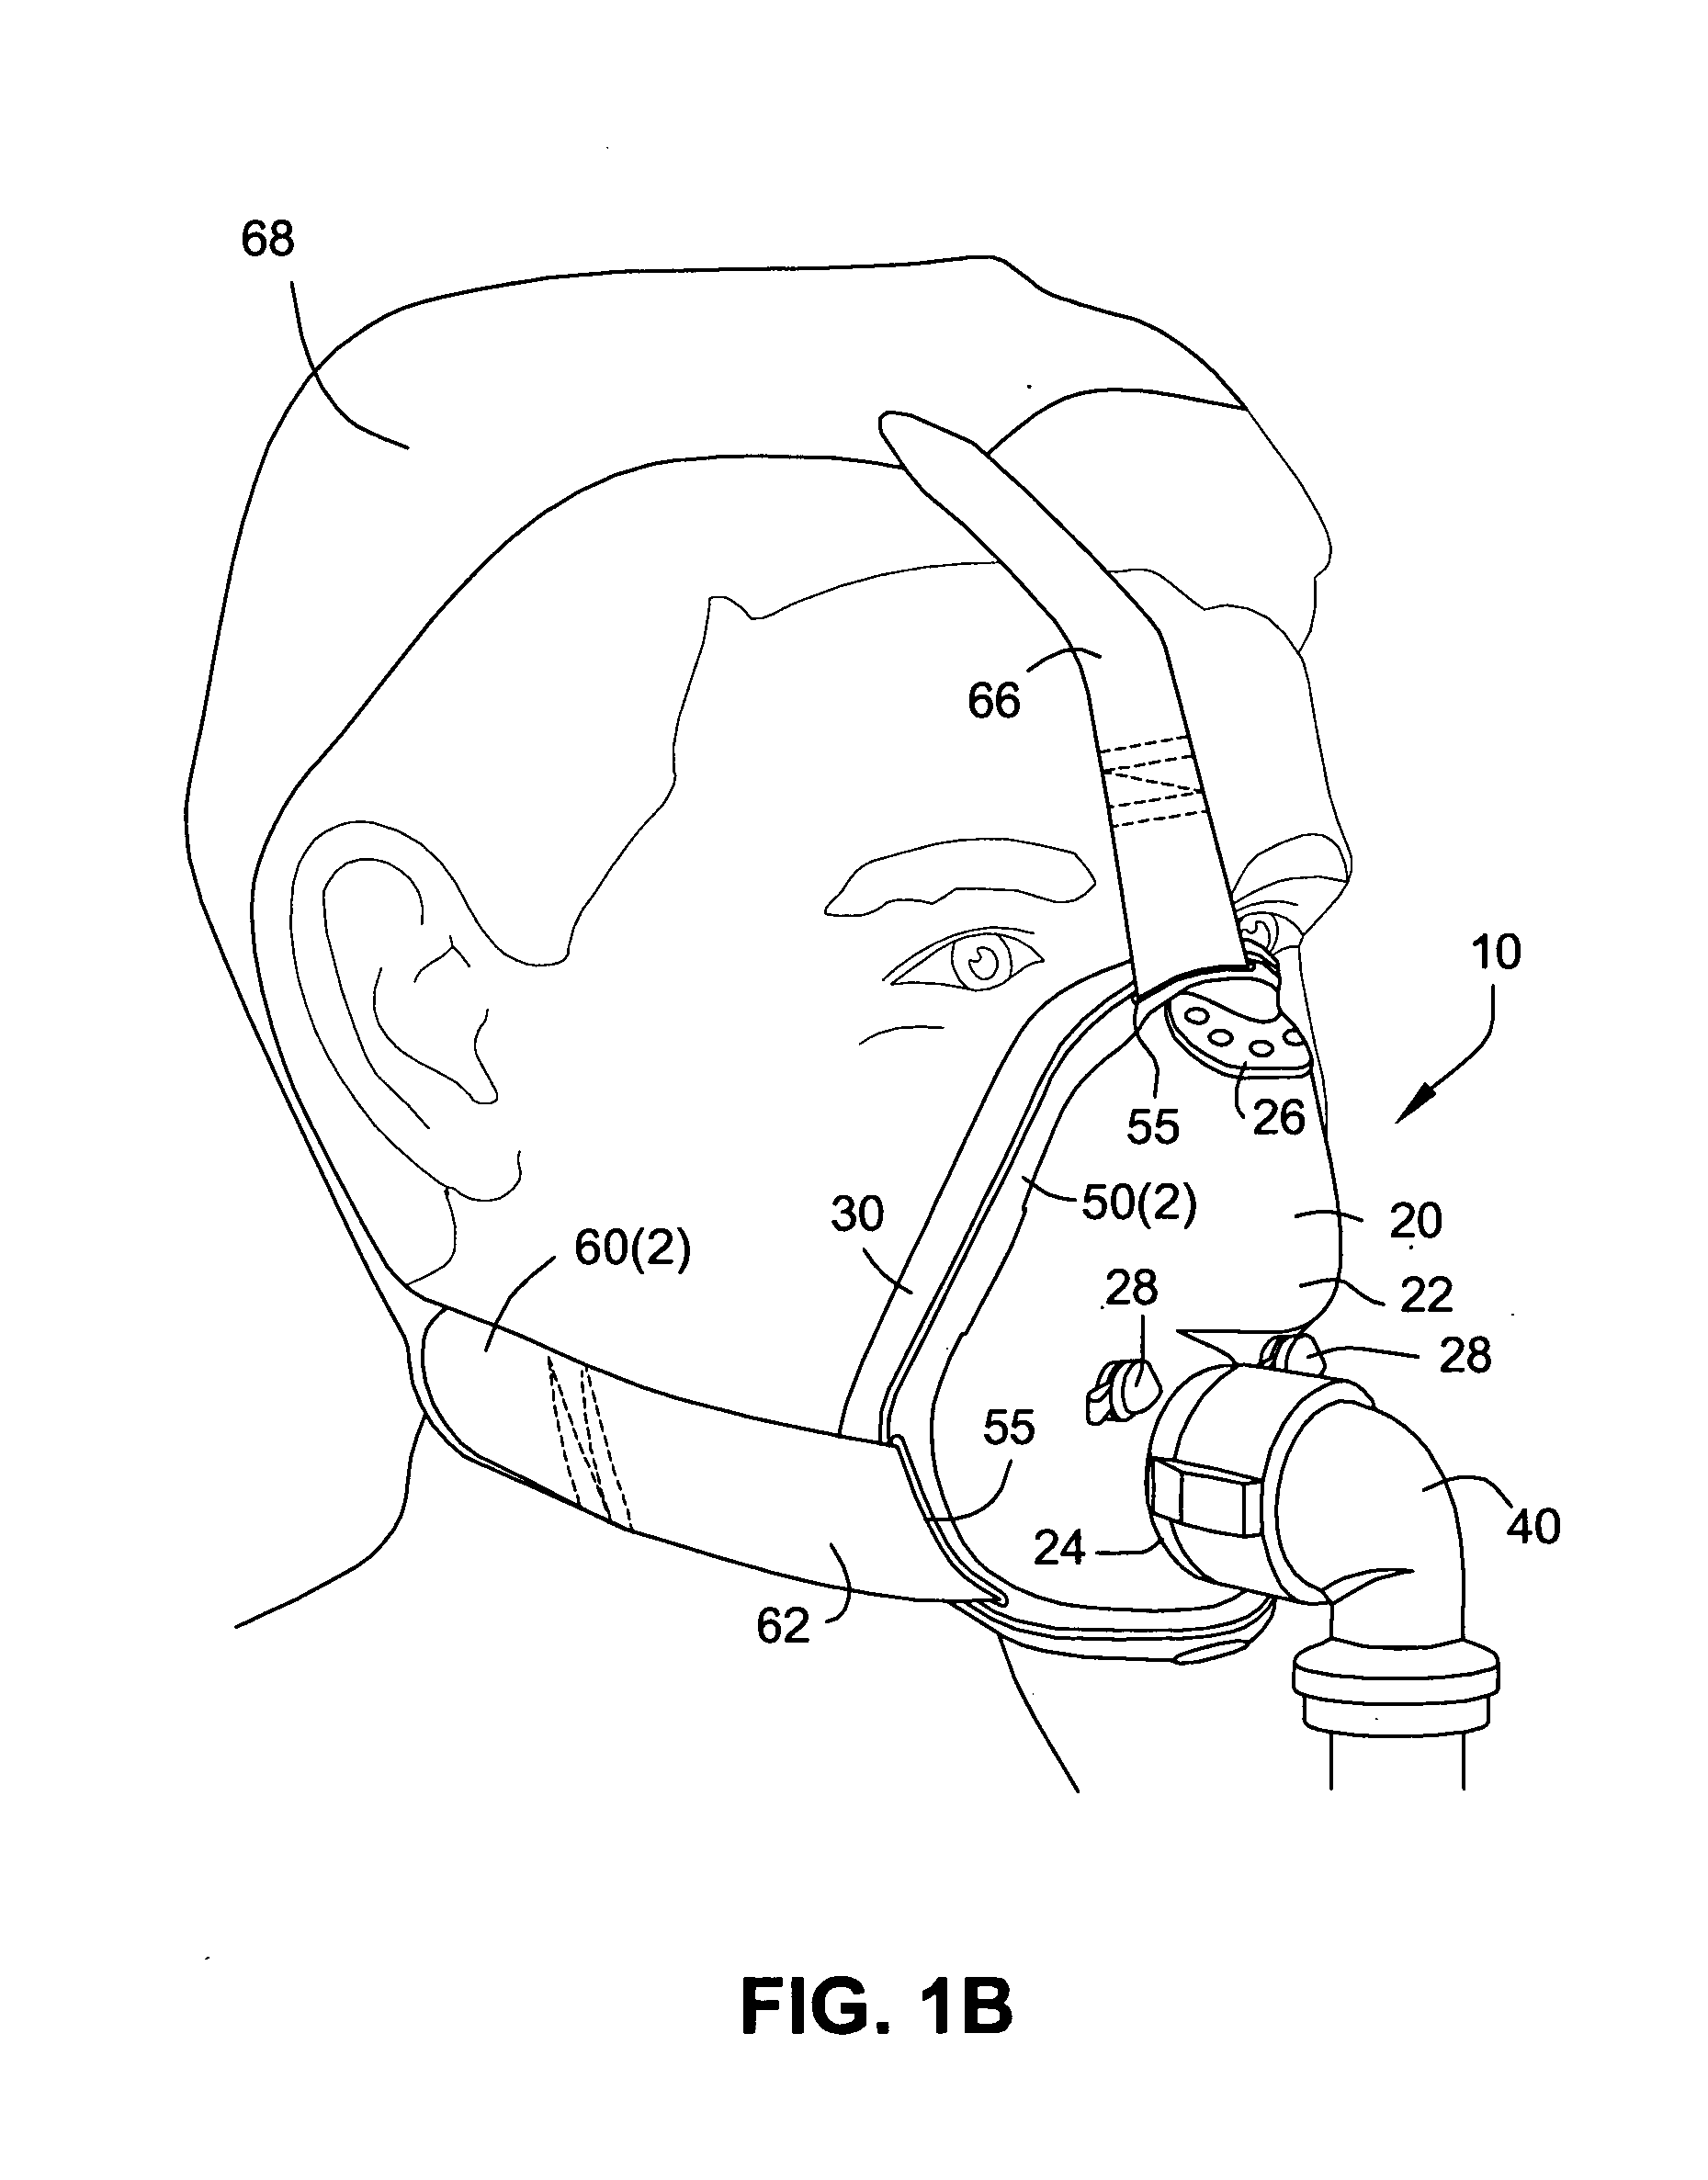 Mask system with interchangeable headgear connectors